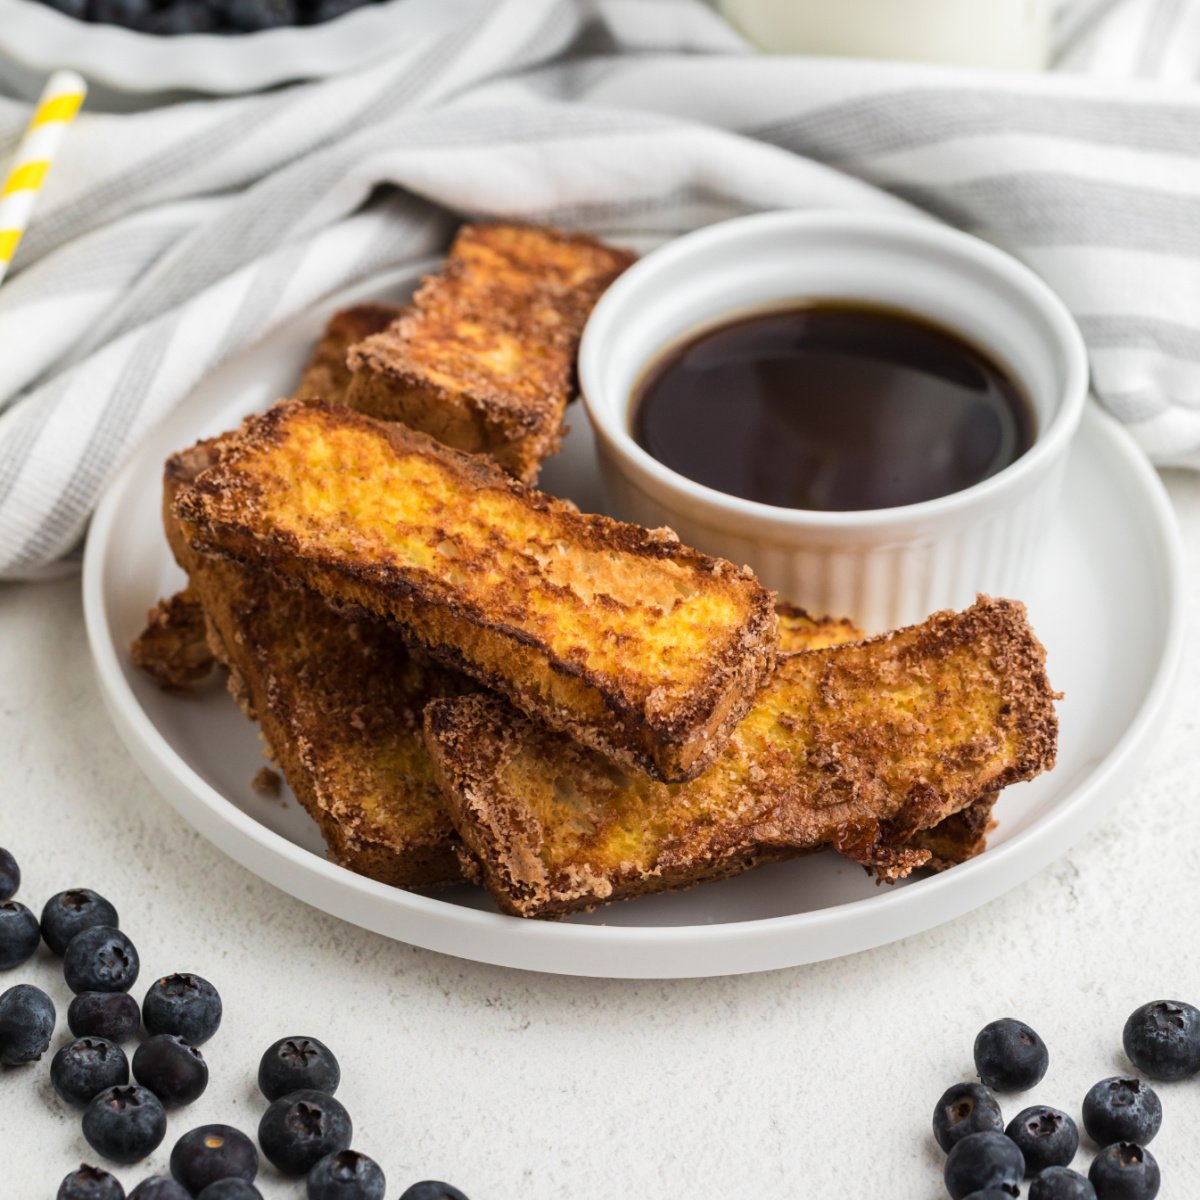 French toast sticks made in the air fryer on a white plate with blueberries surrounding it.